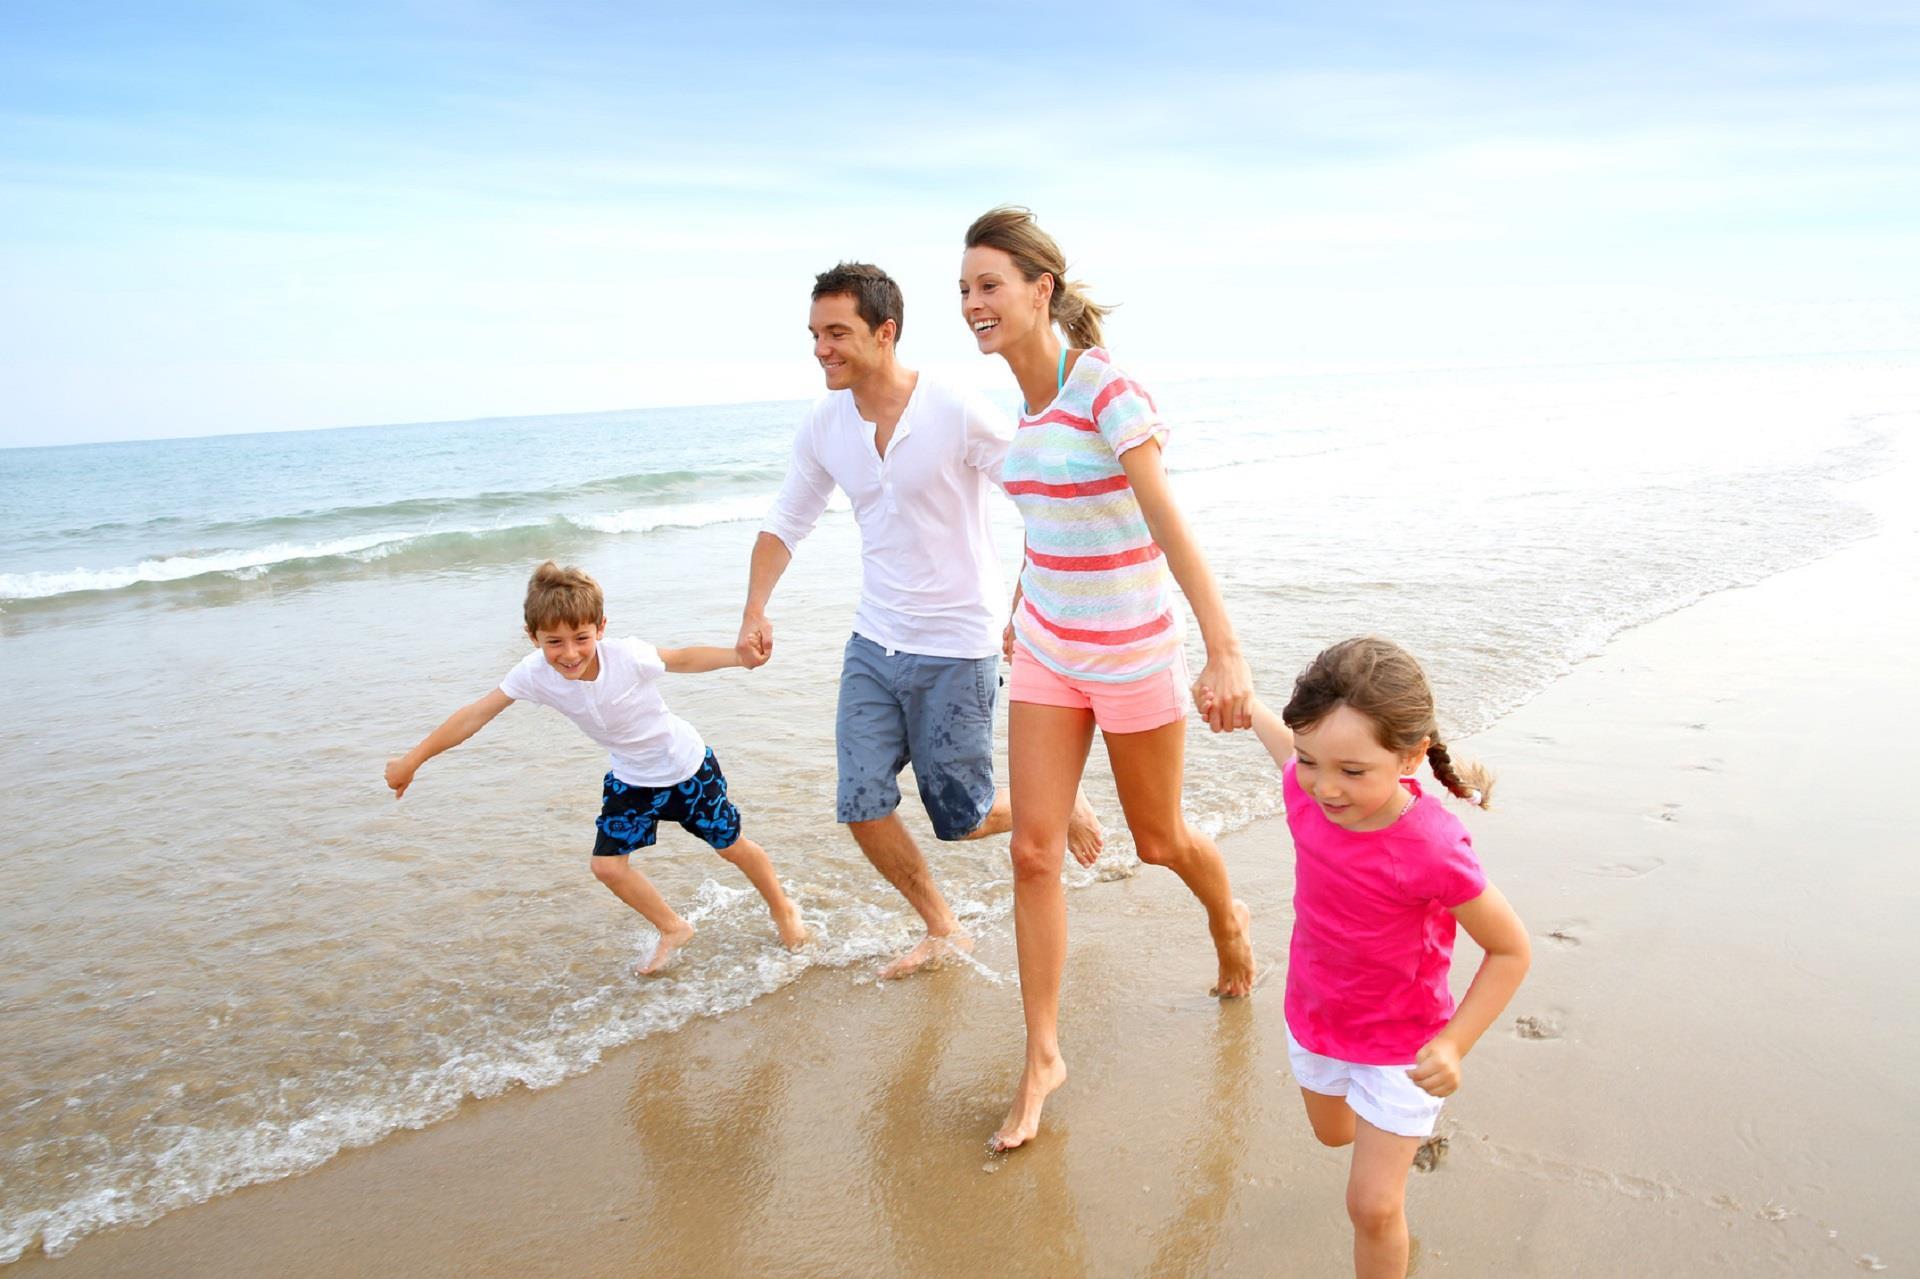 A family plays on the beaches of Bald Head Island